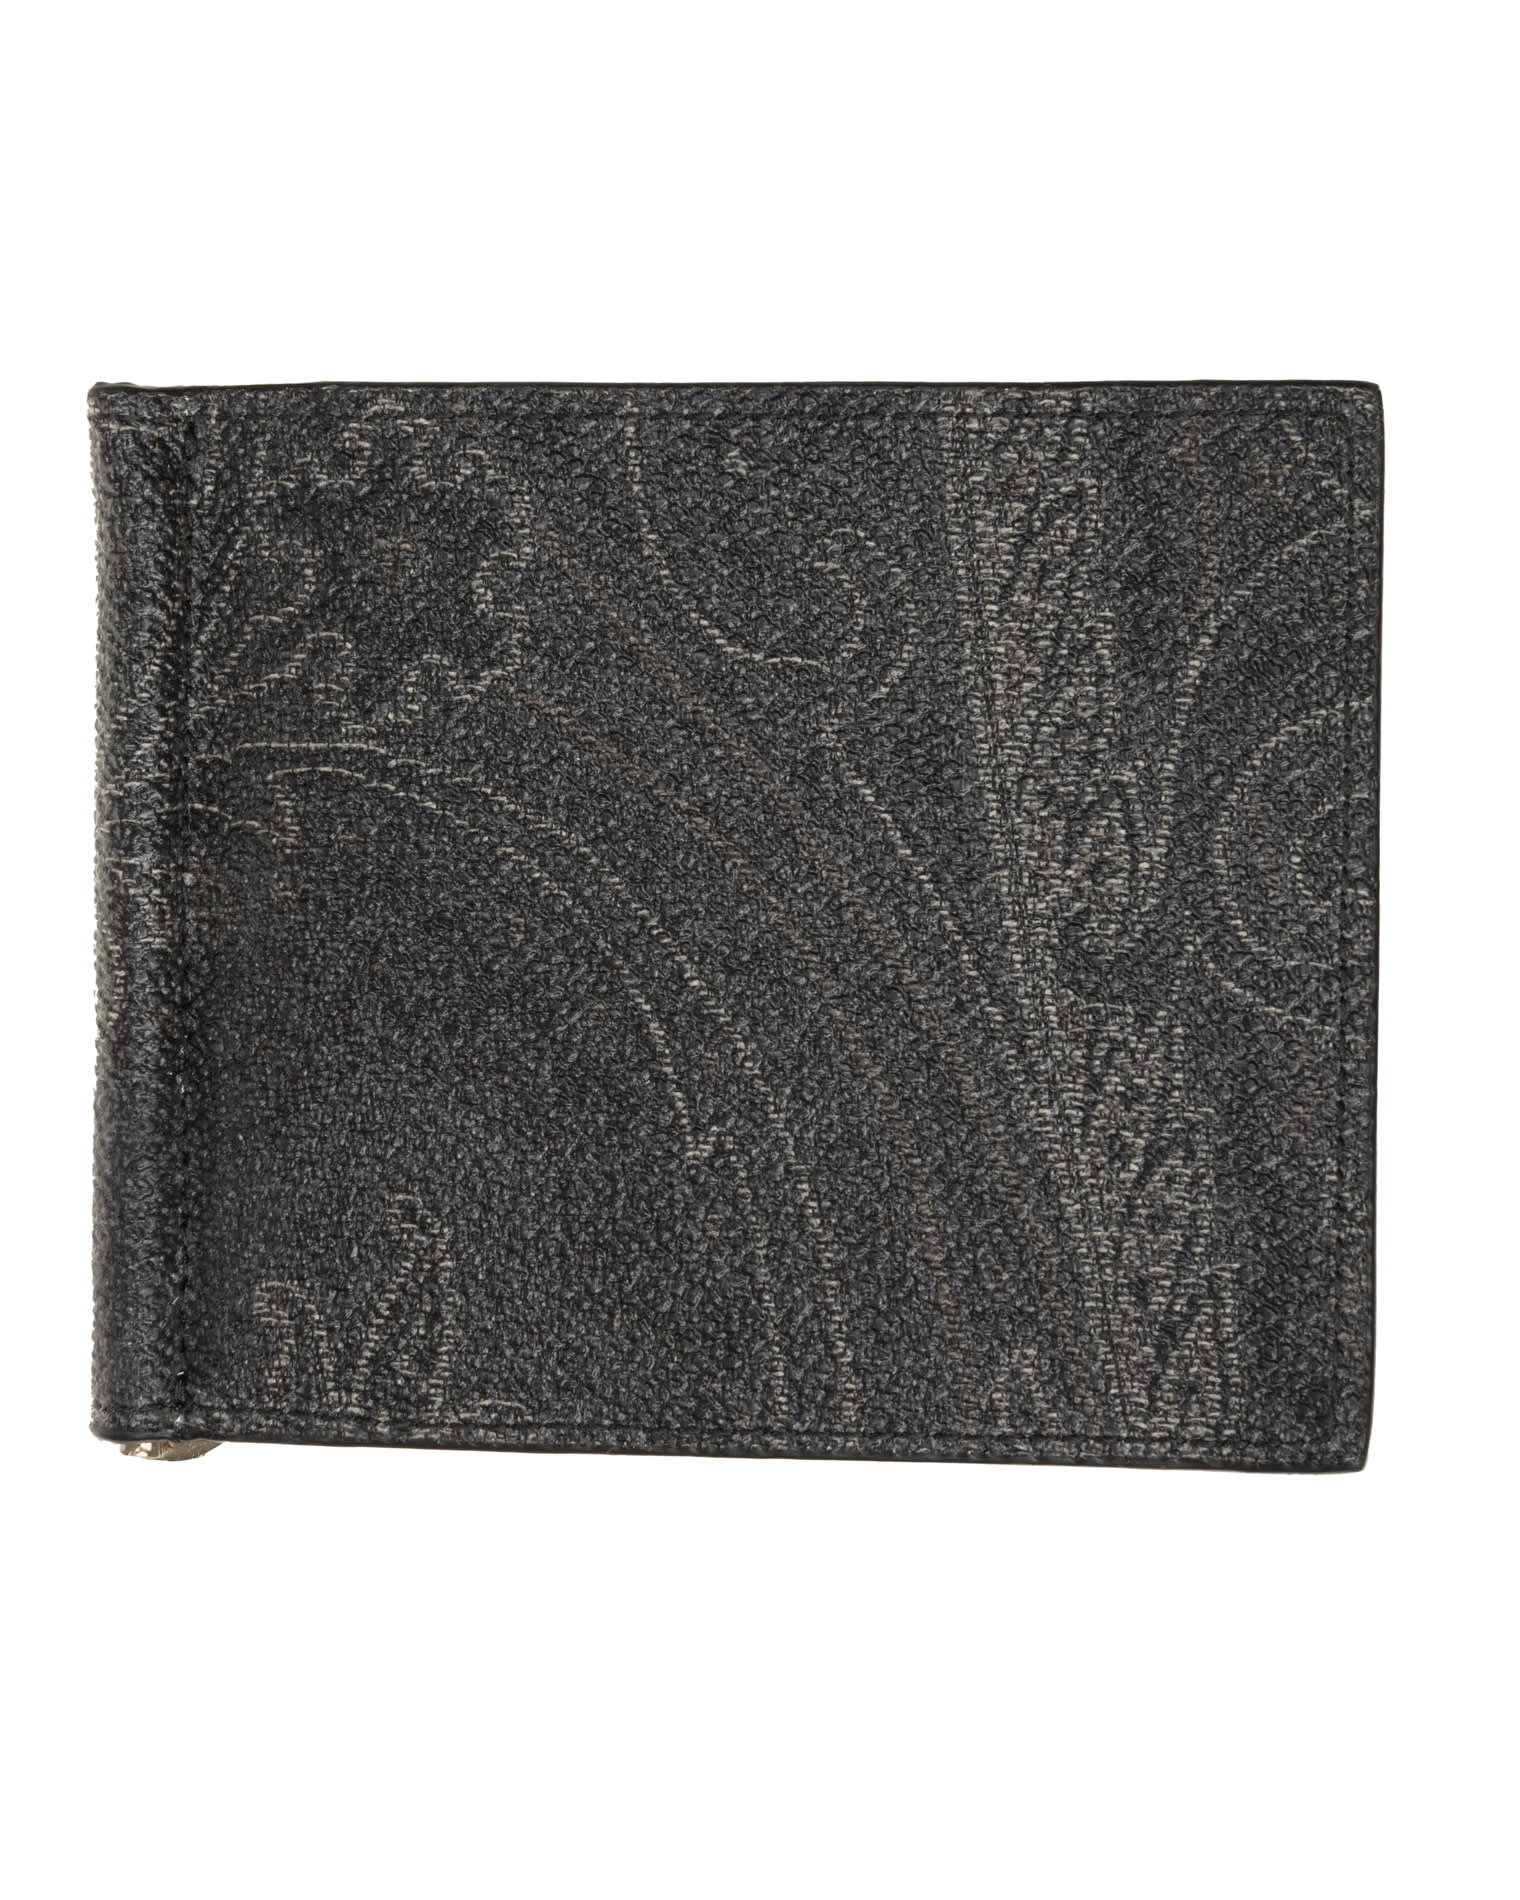 Etro wallet with metal clip, made